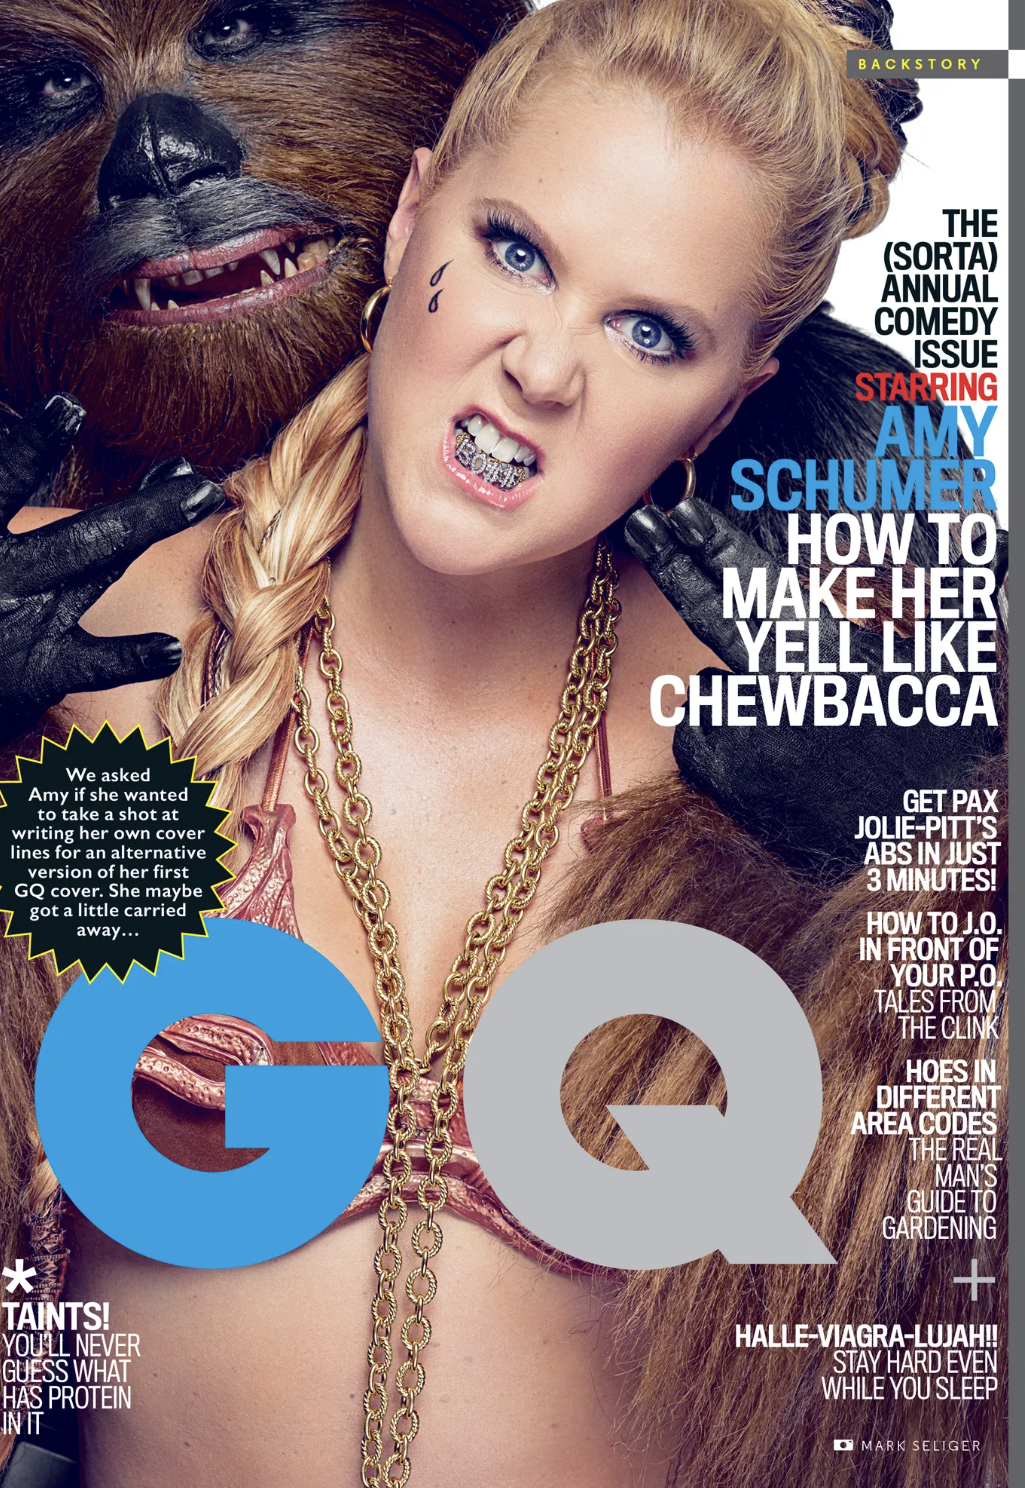 poster - We asked Amy if she wanted to take a shot at writing her own cover Ines for an alternative version of her first Gq cover. She maybe got a little carried away. The Sorta Annual Comedy Issue Starring Amy Schumer How To Make Her Yell Chewbacca Get P